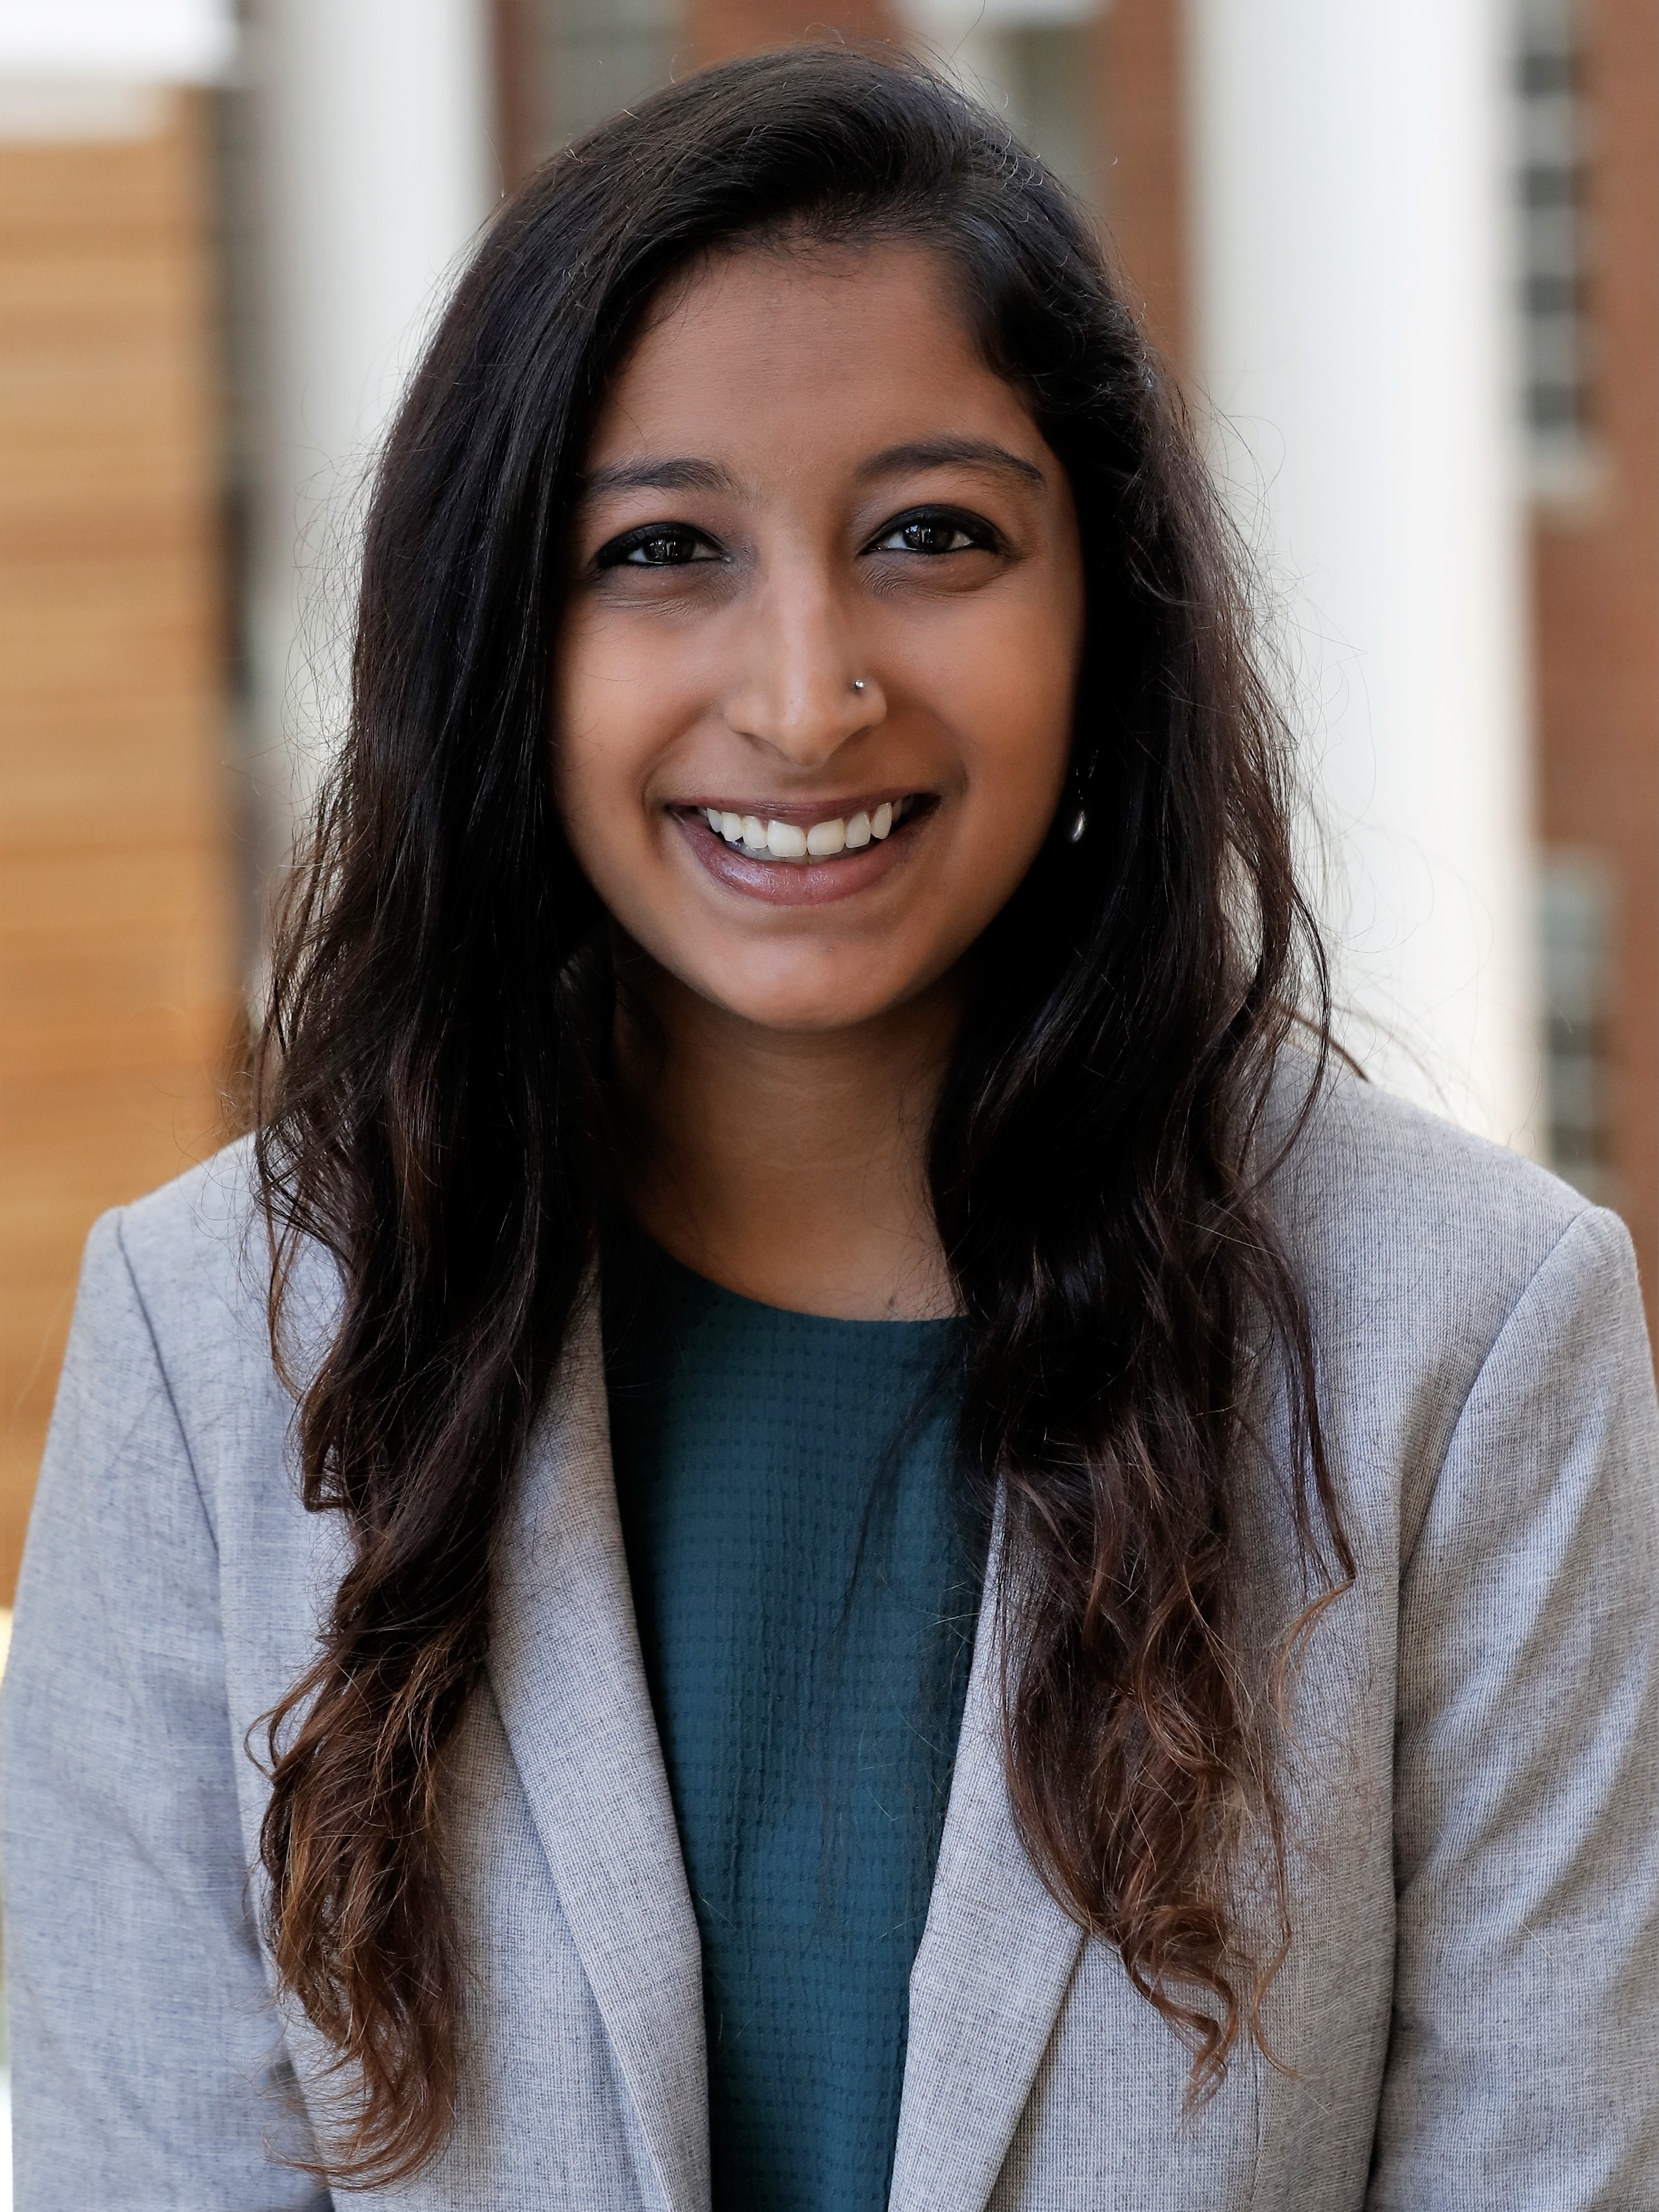 Sanjana Srikanth, Operations Manager for Cakes for BLM - Based in Houston, Texas